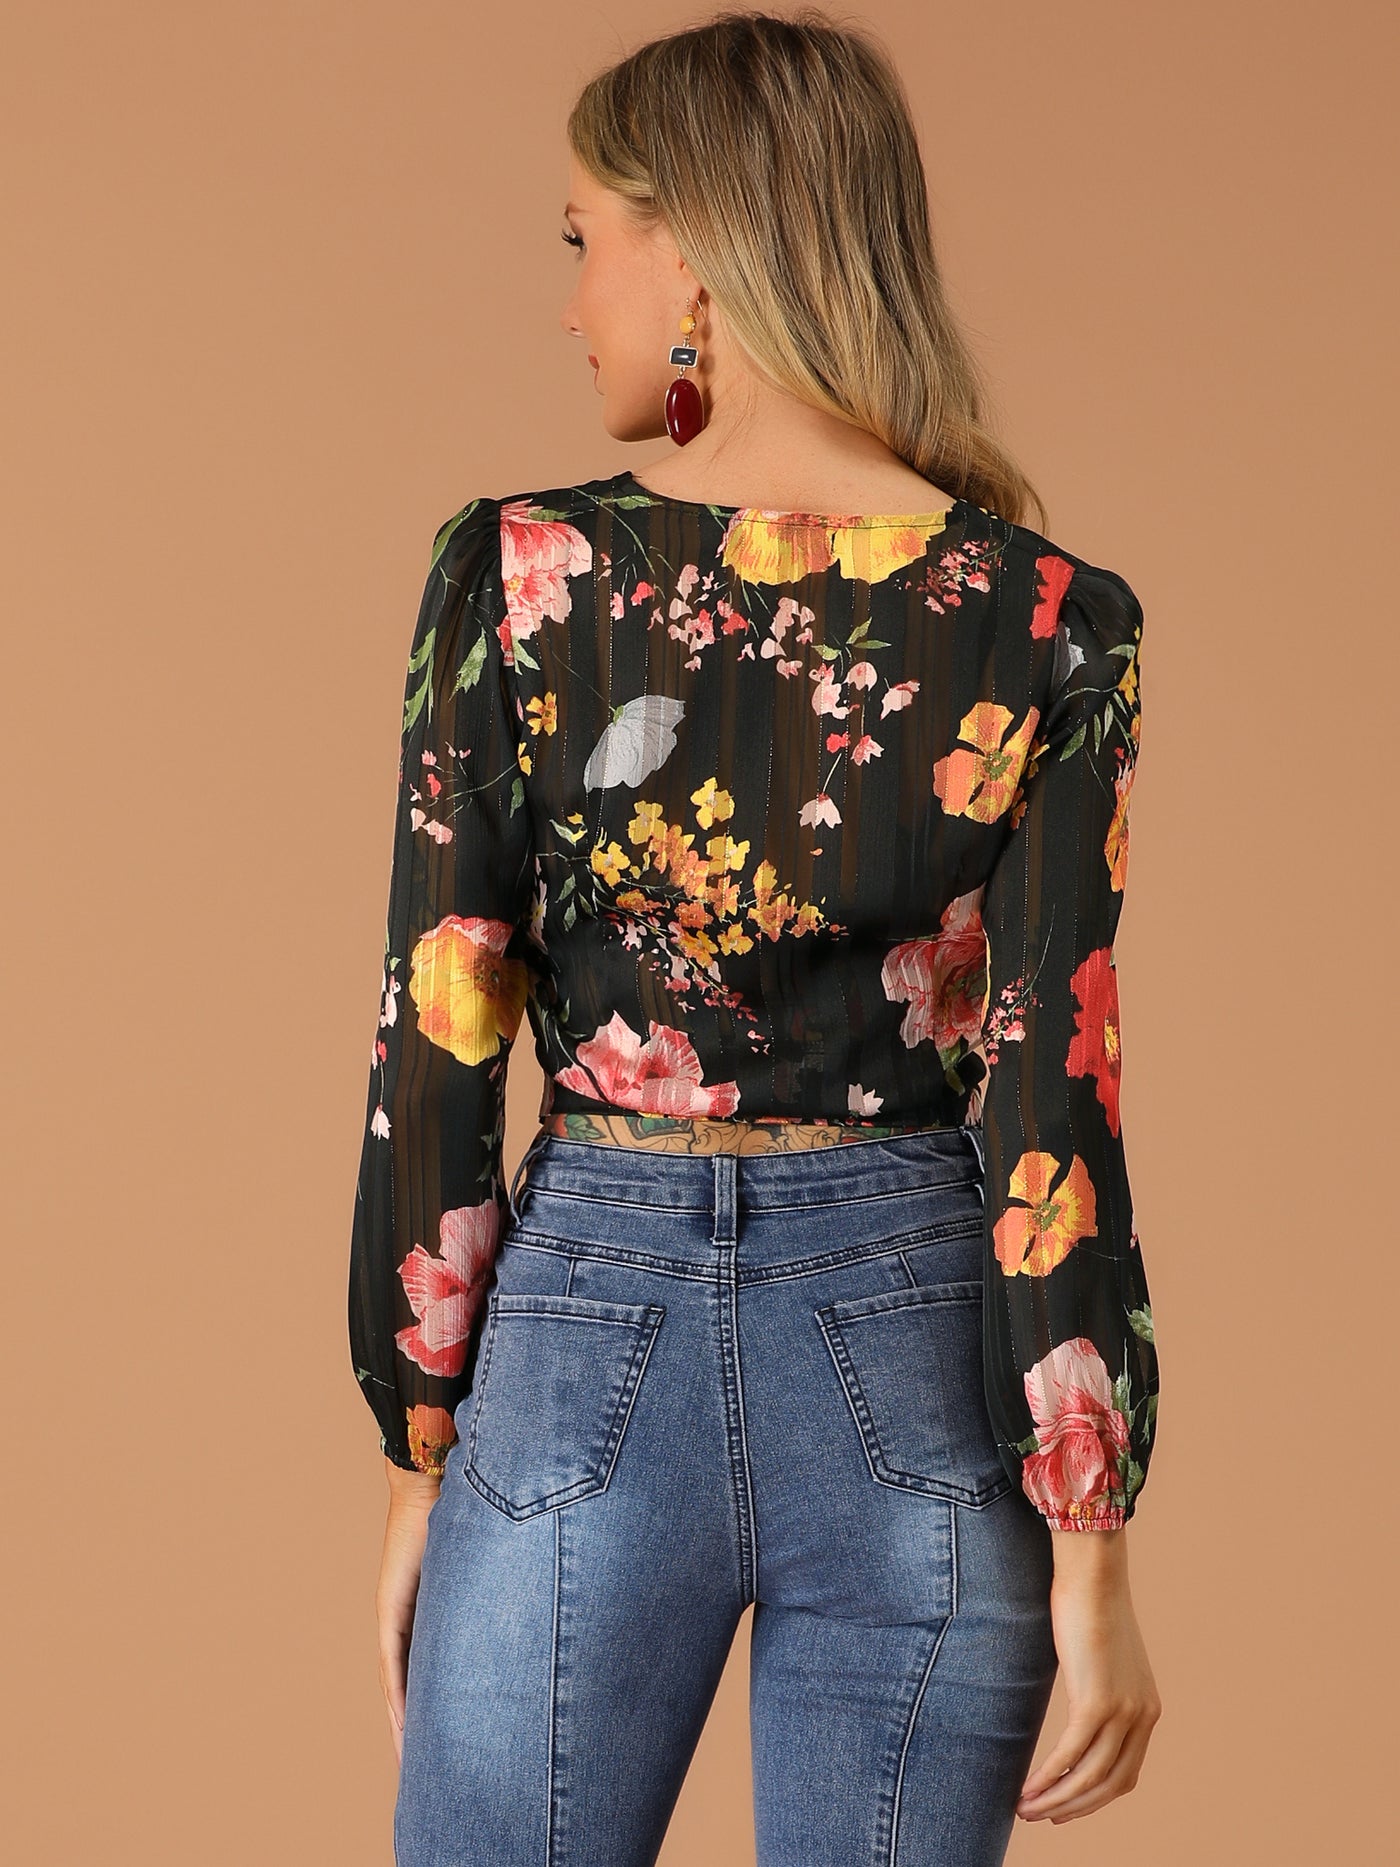 Allegra K Floral Chiffon Blouse V Neck Tie Knot Puff Long Sleeve Crop Top